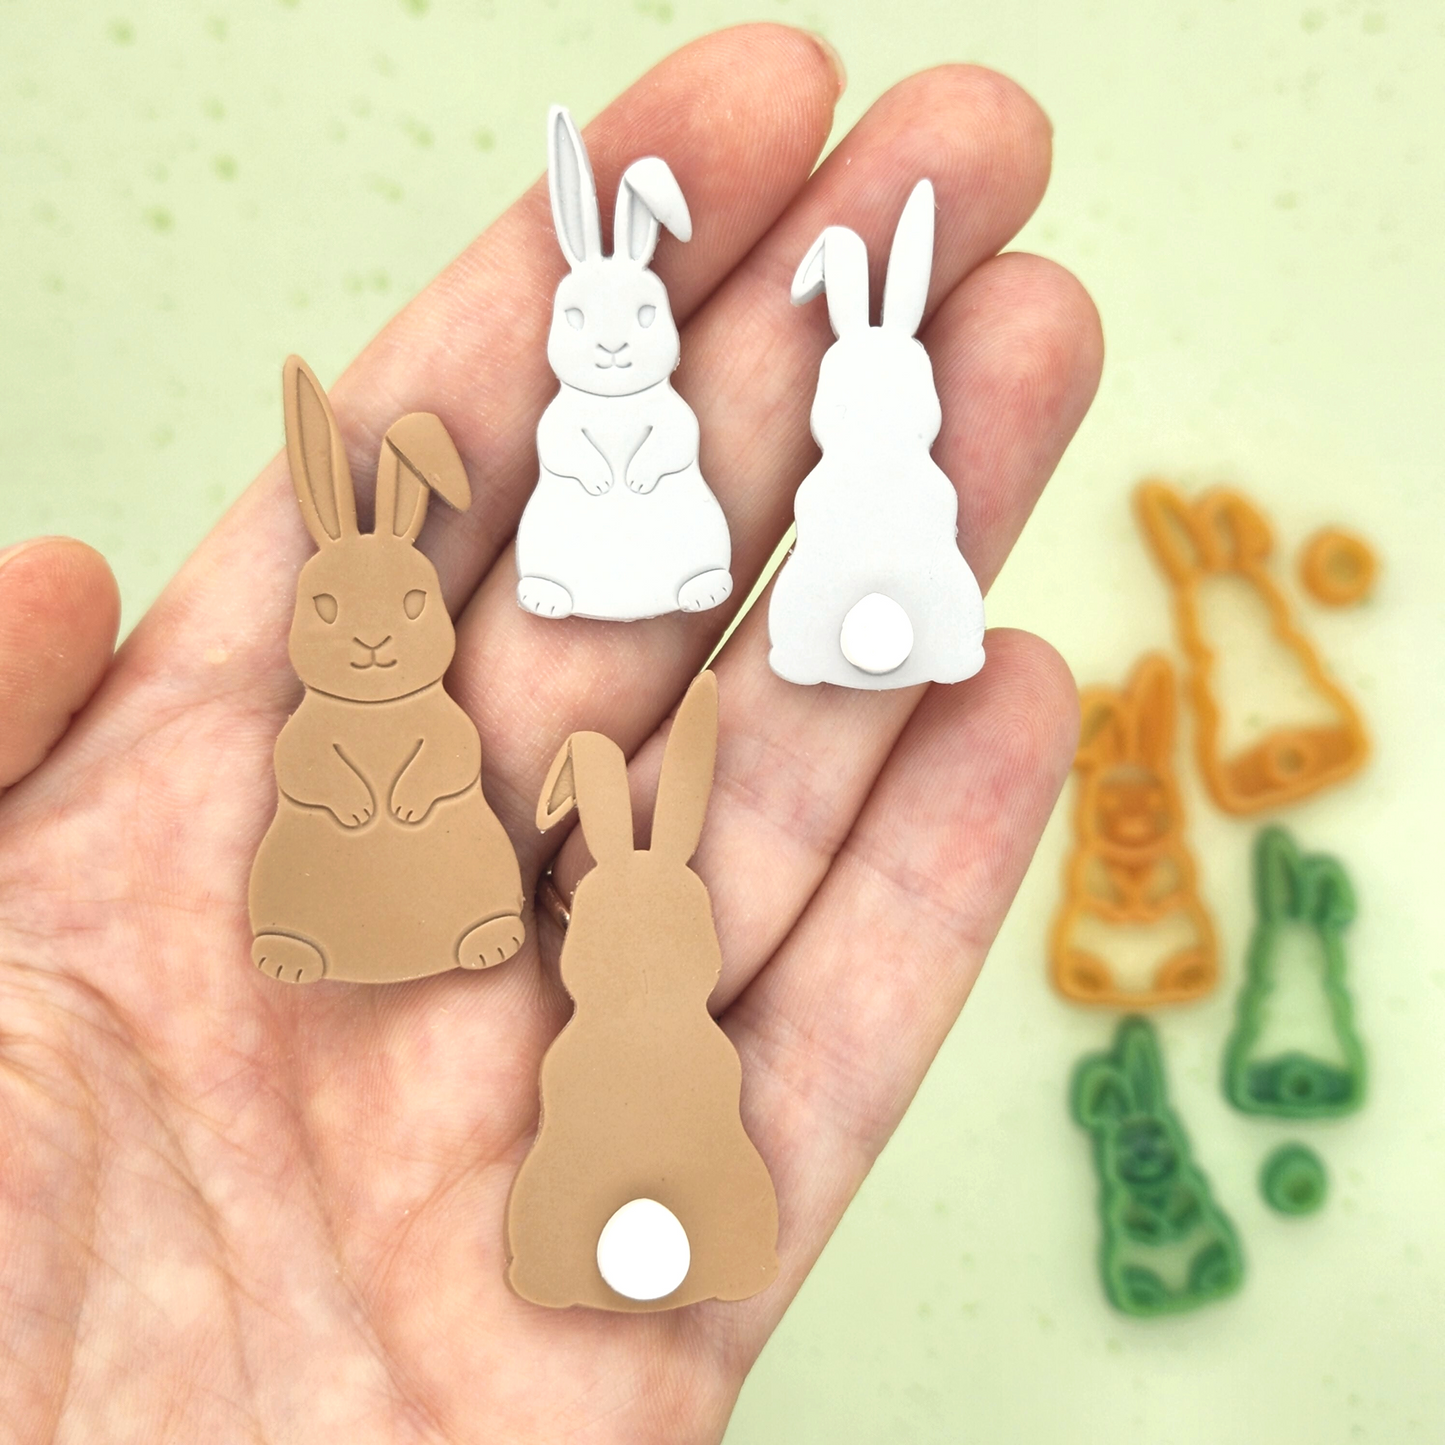 Sample finish product of Double sided bunny set which shows the front, back, and tail of bunny.